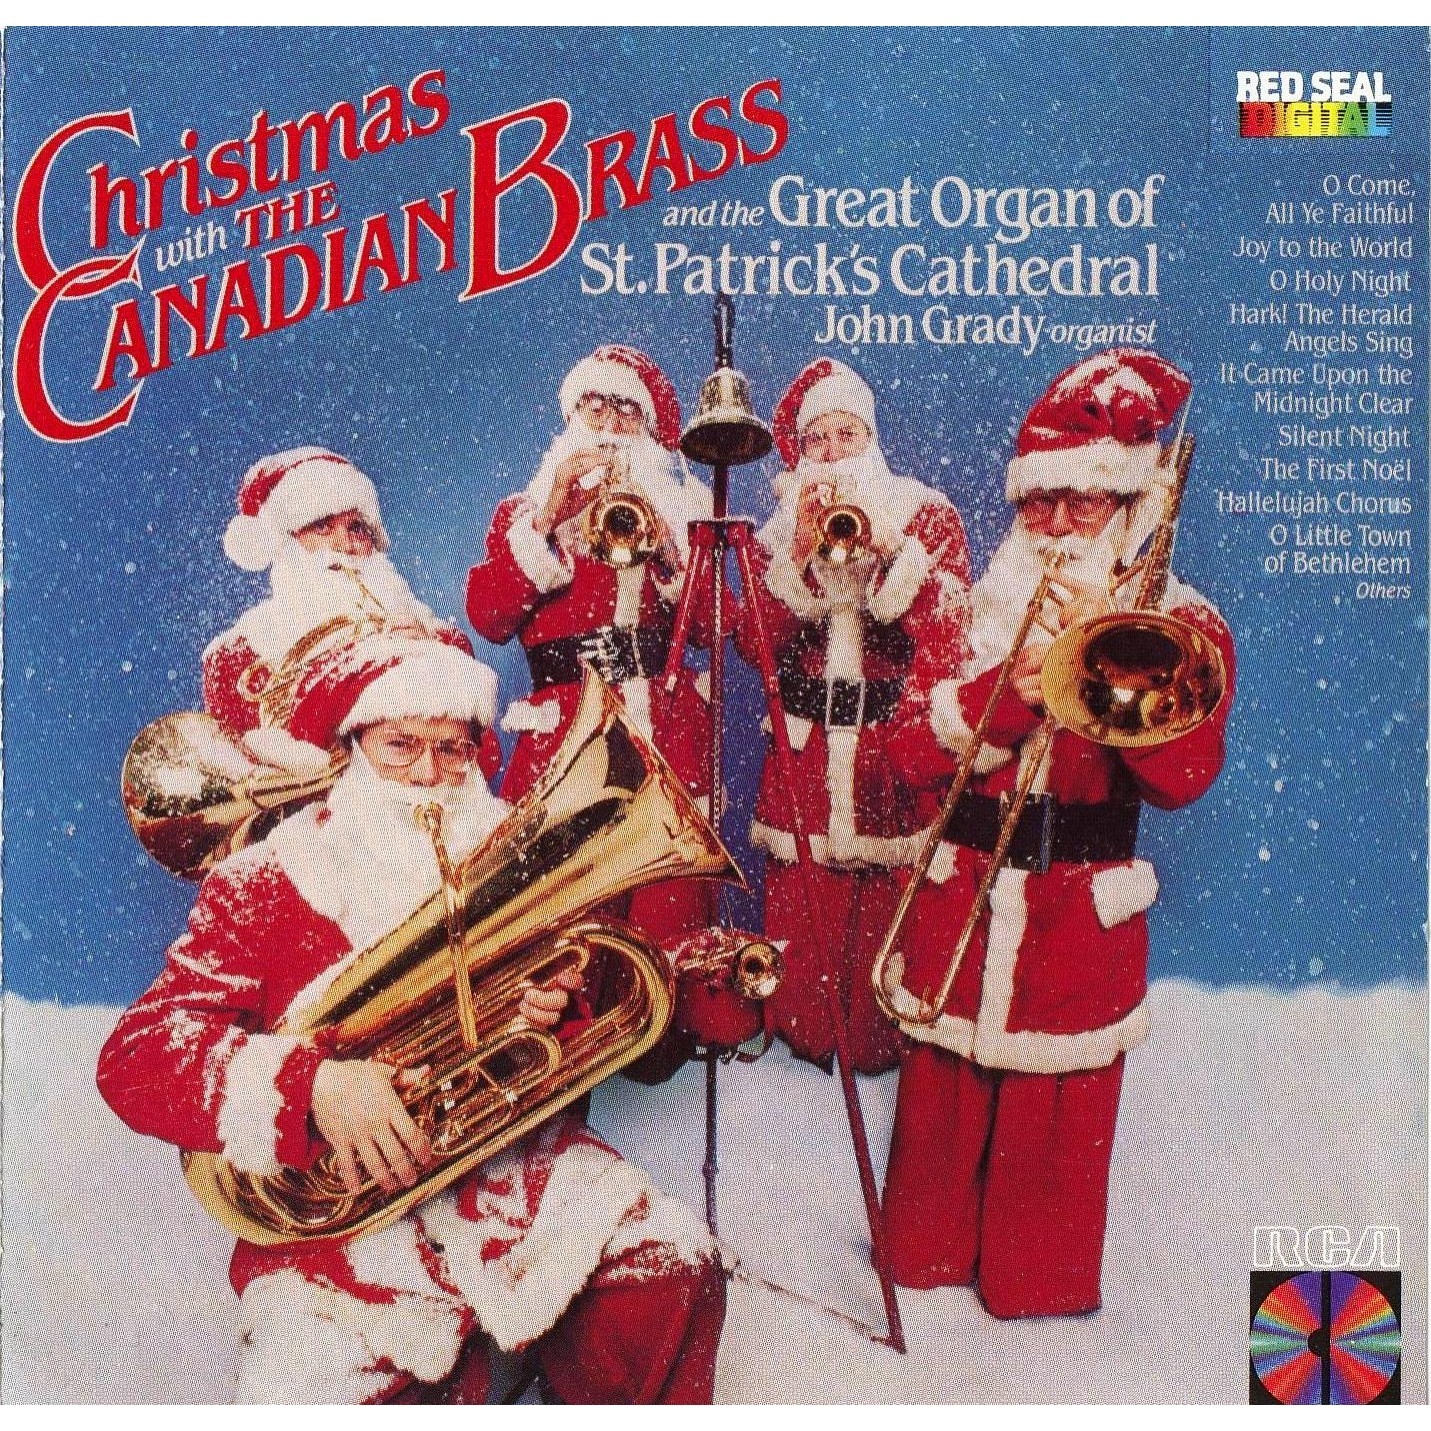 Christmas with the Canadian Brass & the Great Organ of St. Patrick's Cathedral